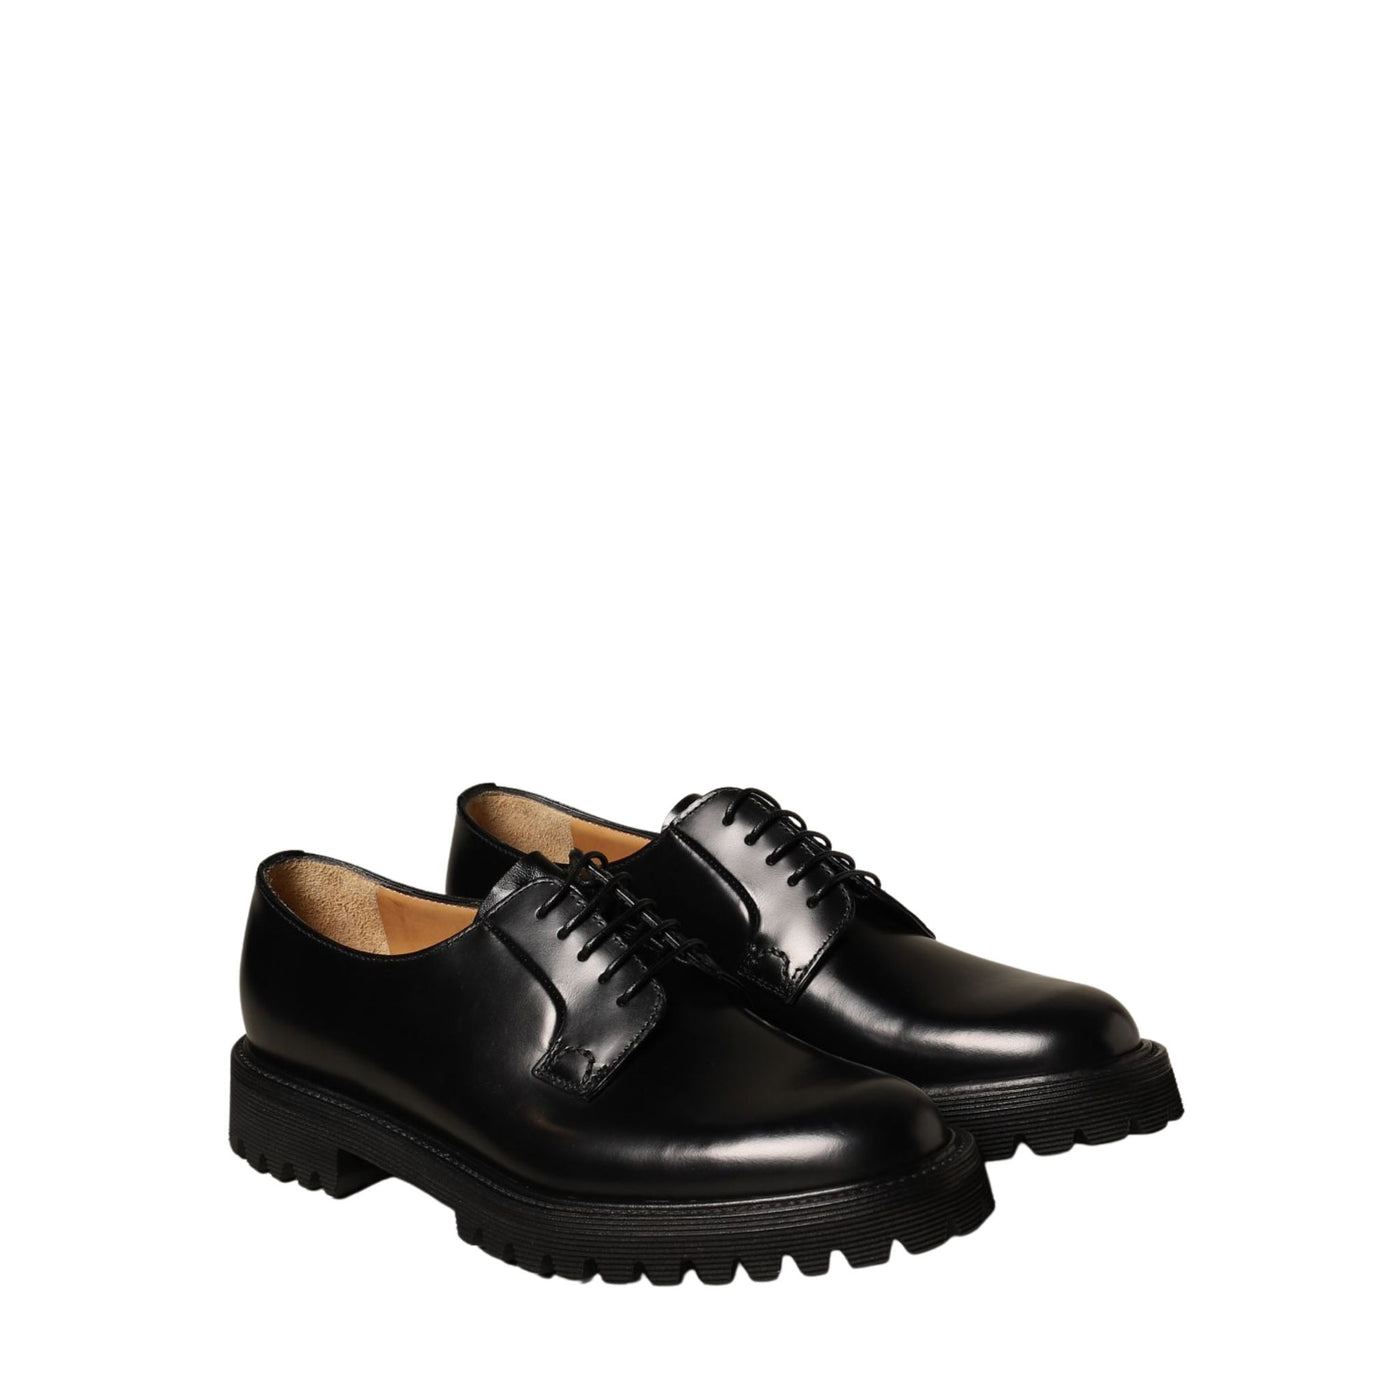 Women's lace-up shoe in smooth leather